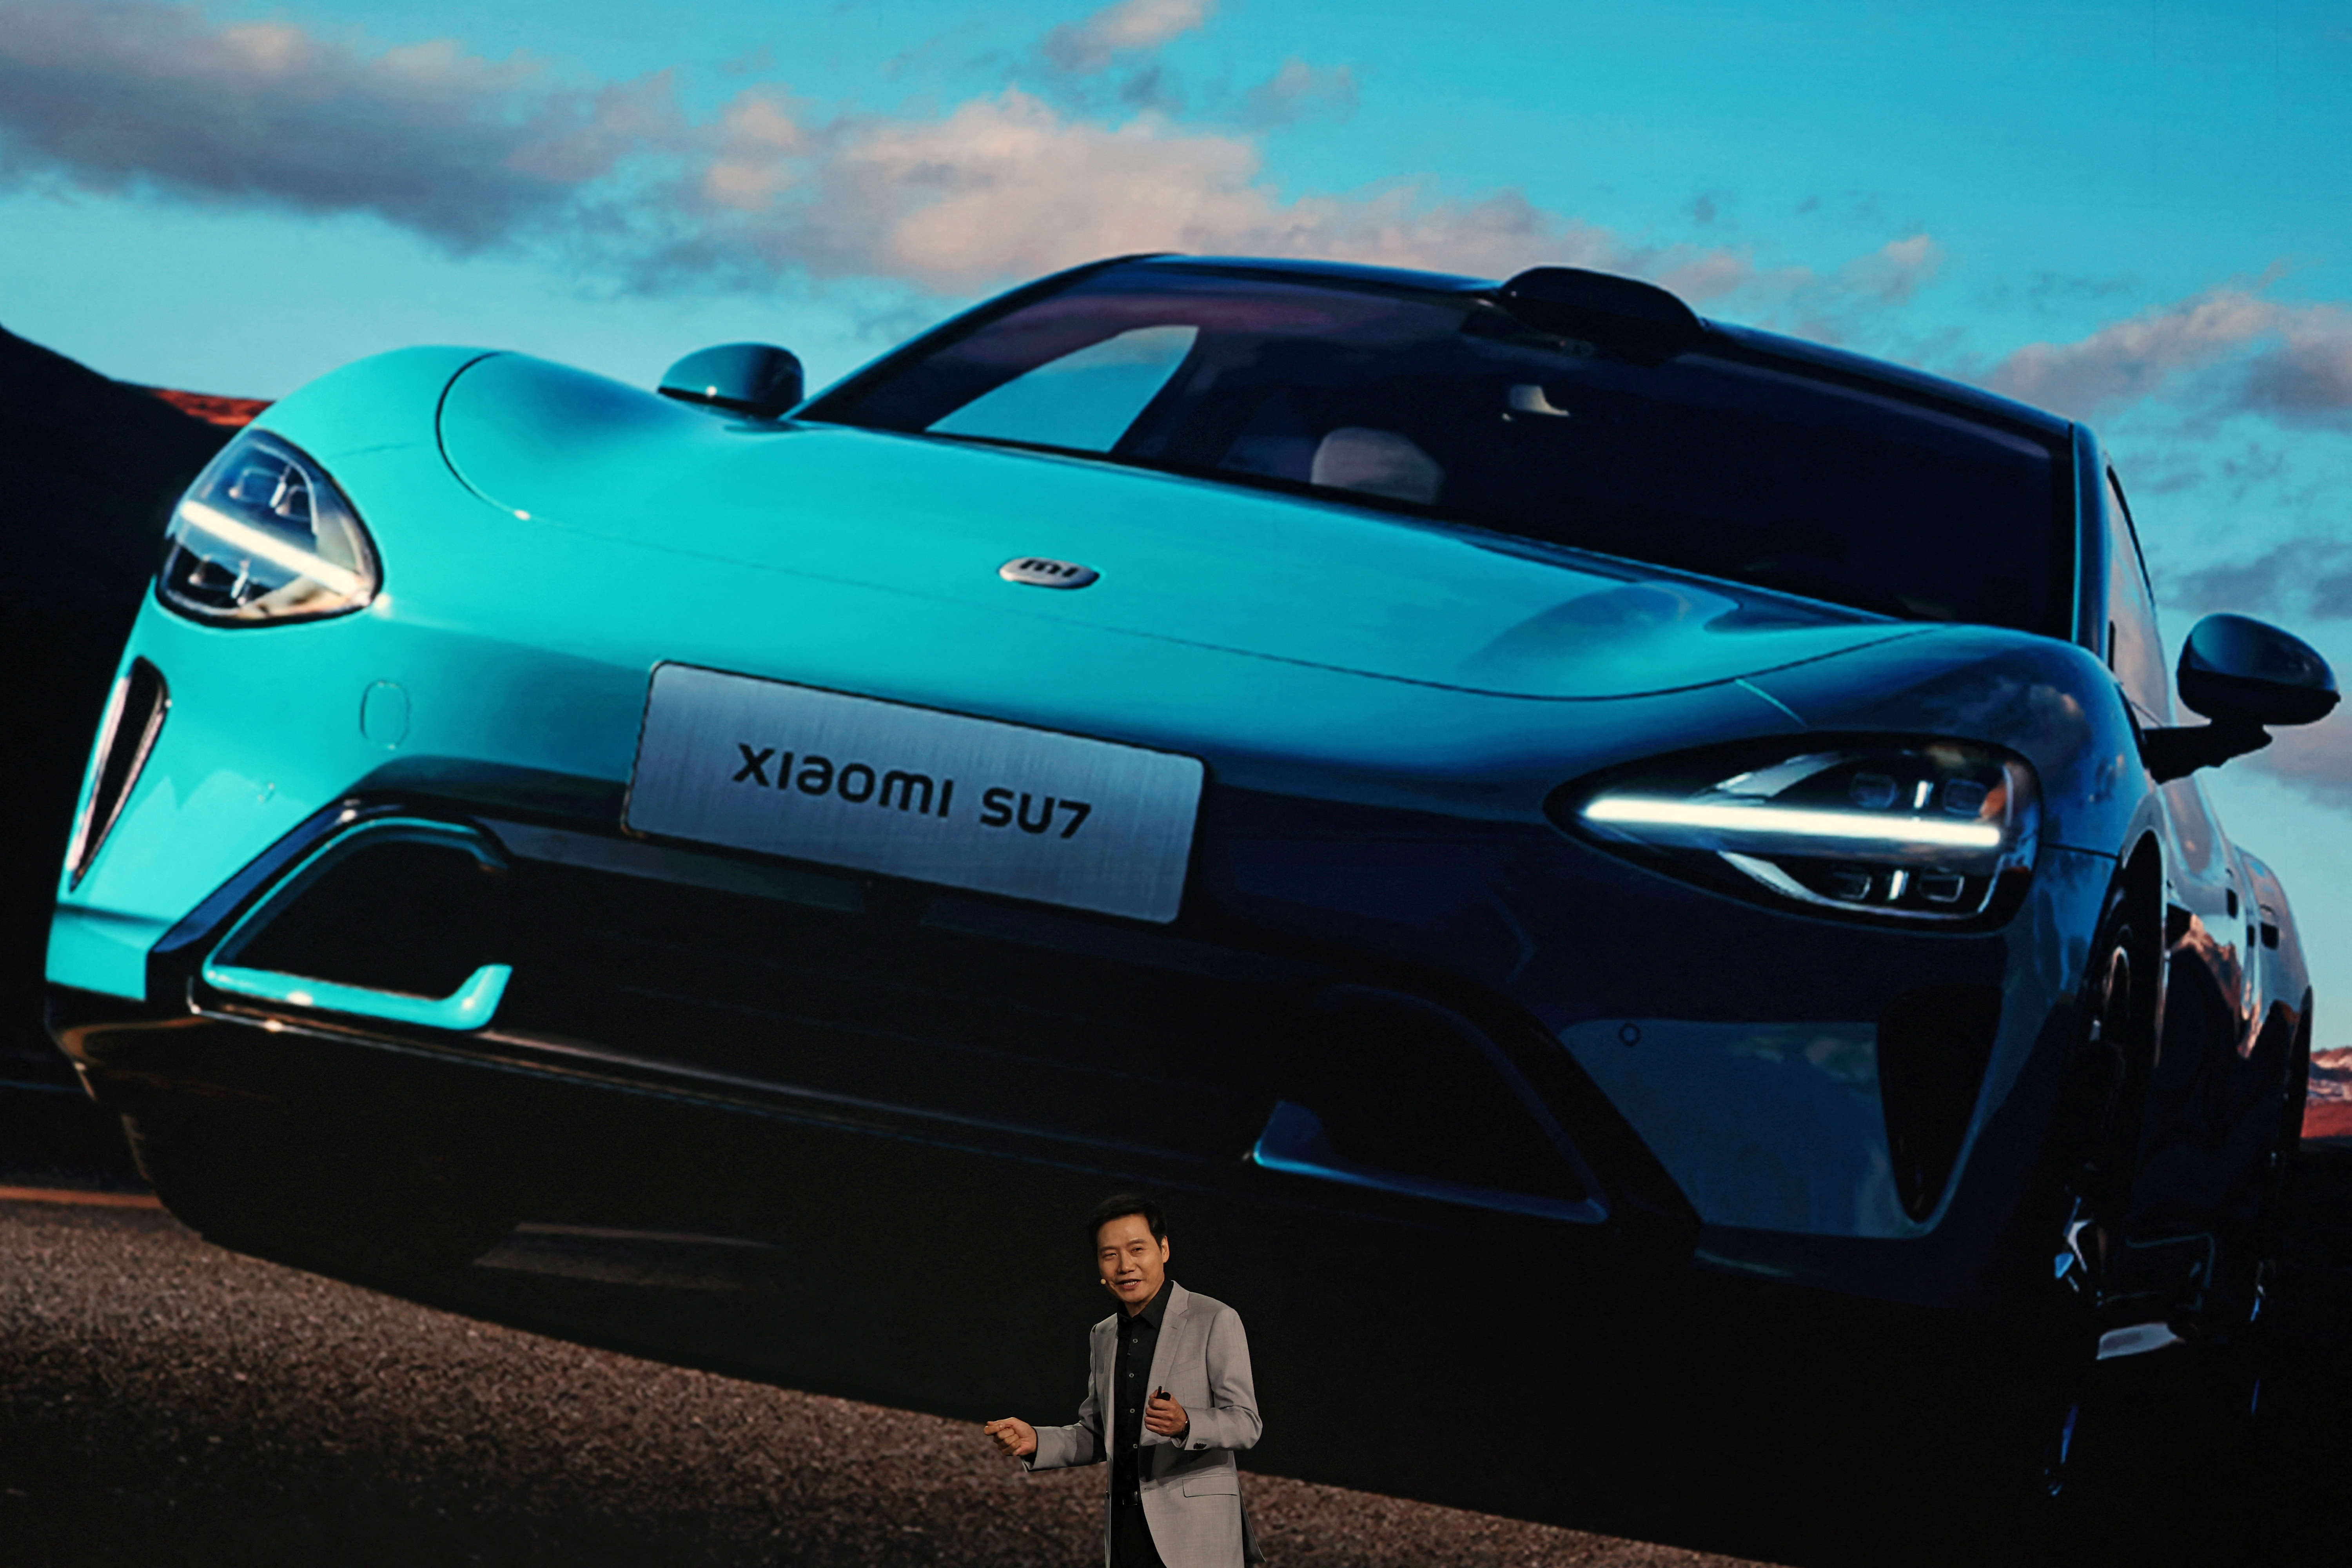 Chinese firms BYD and GAC are two of the biggest sellers of EVs globally, but a new competitor, Xiaomi, has entered the market after unveiling its first EV in Beijing this month. /Florence Lo/Reuters